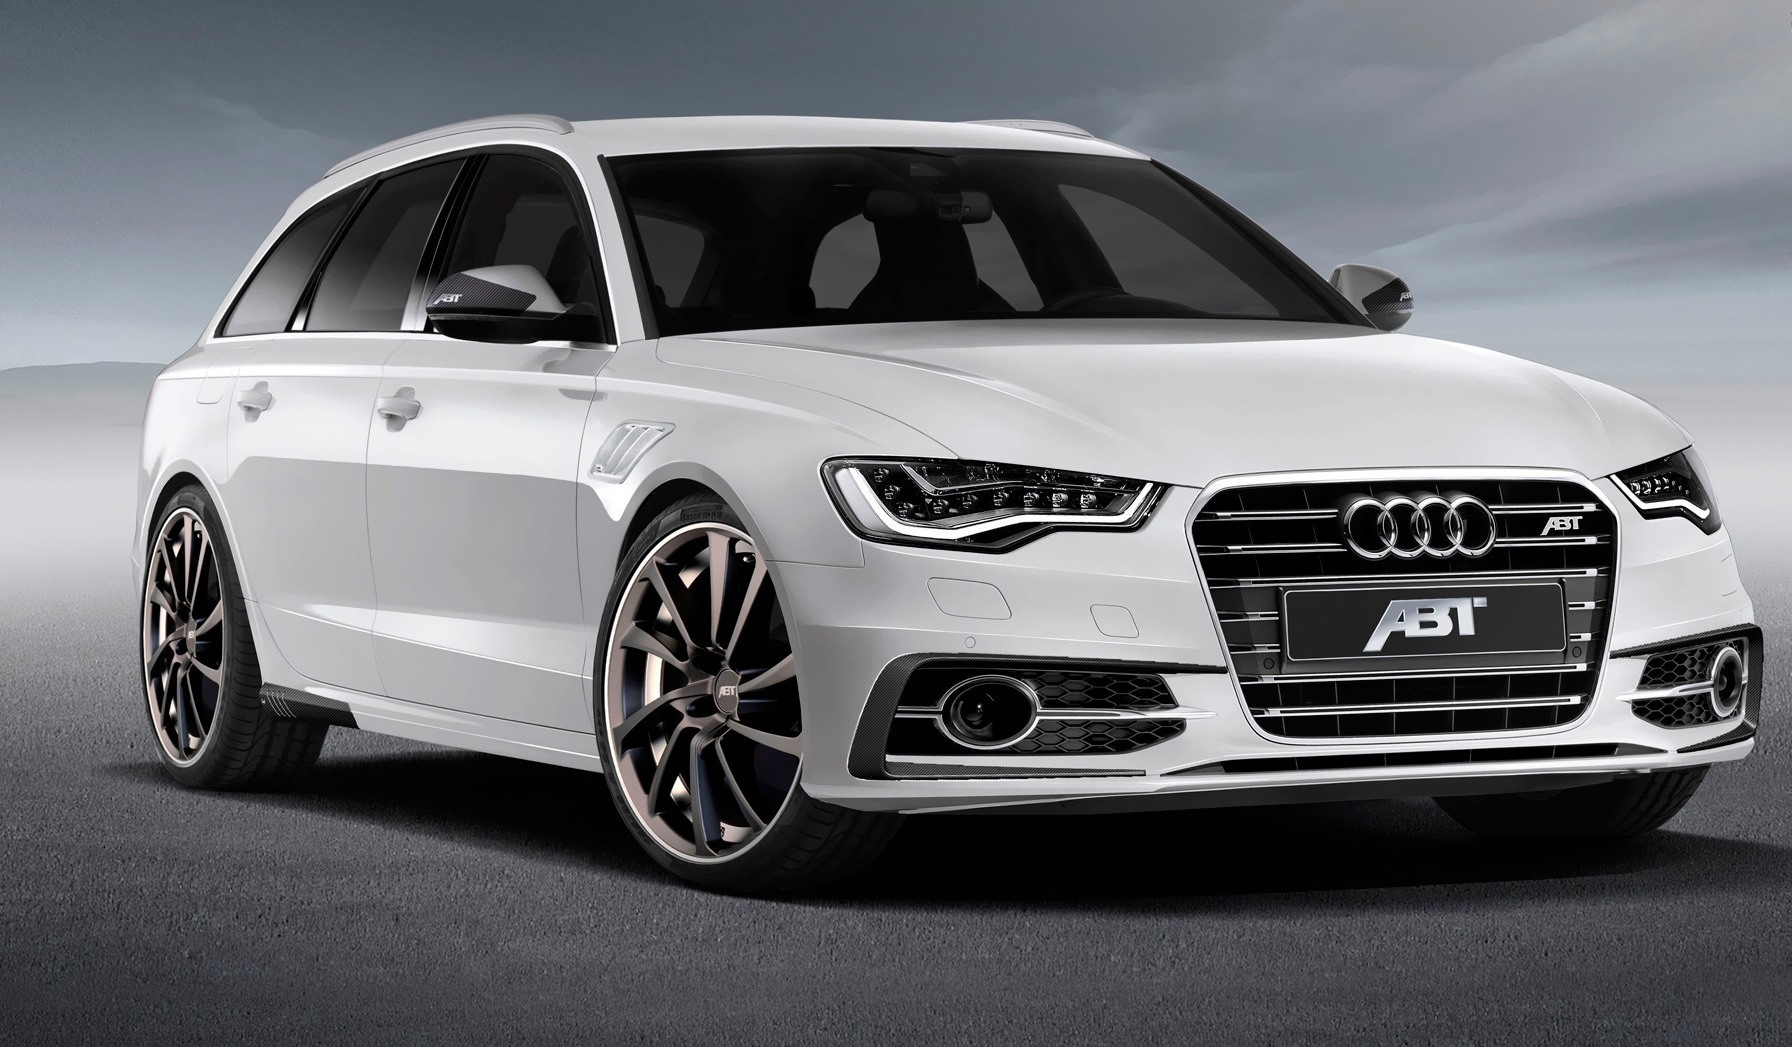 Audi Car Hd Images And Pictures - Audi S6 2013 Abt , HD Wallpaper & Backgrounds